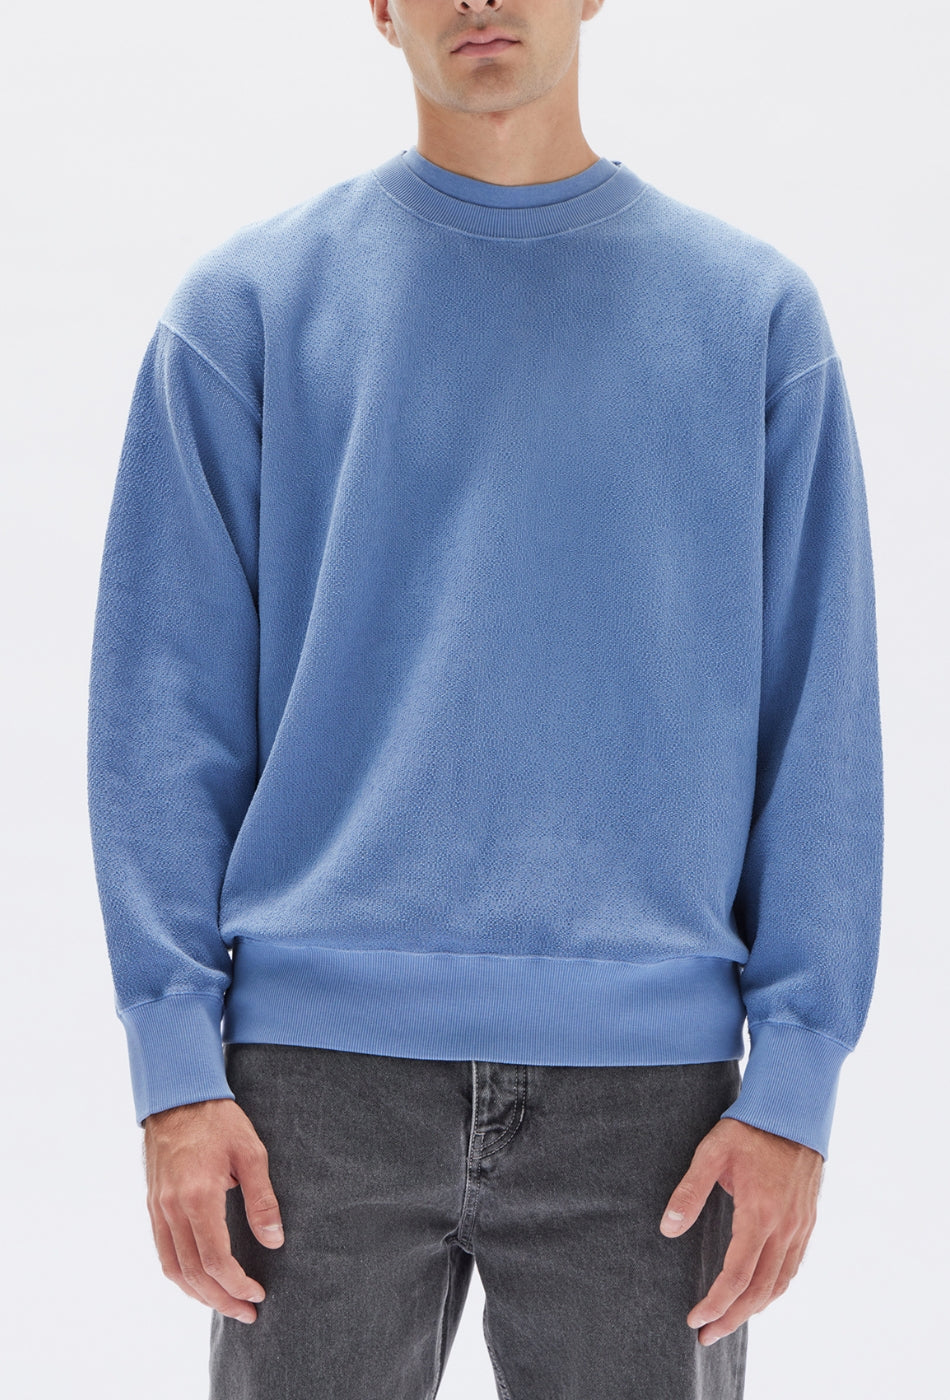 Jeremy Textured Sweat - Infinity-ASSEMBLY LABEL-P&K The General Store